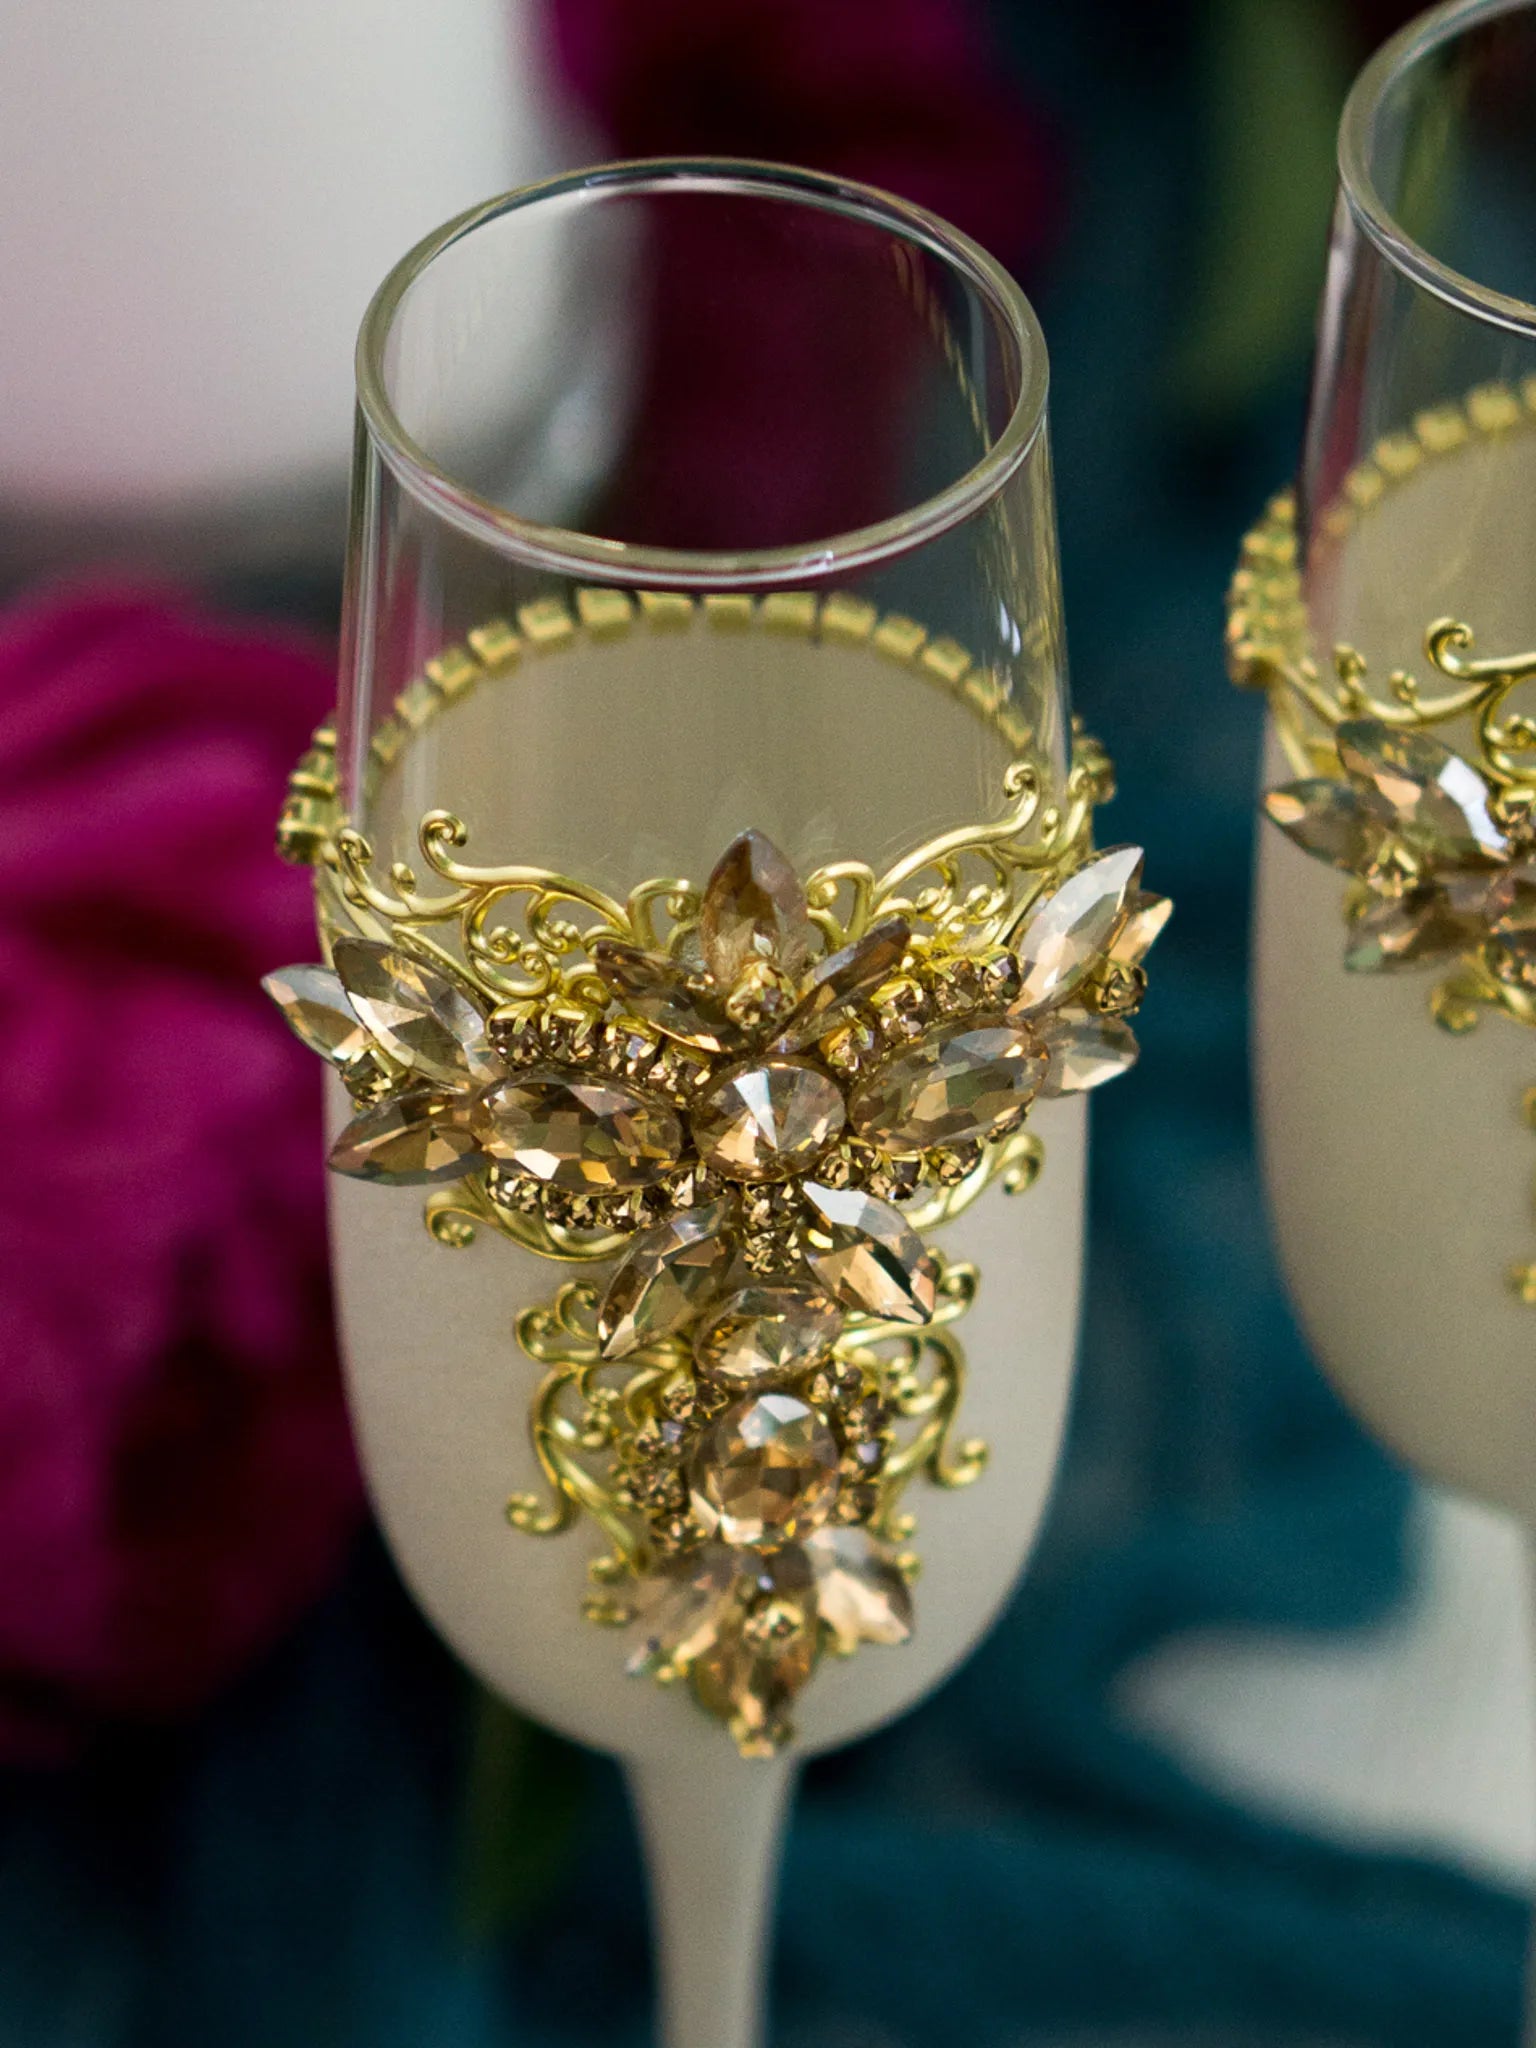 Engraved gold and white wedding flutes with glistening stones